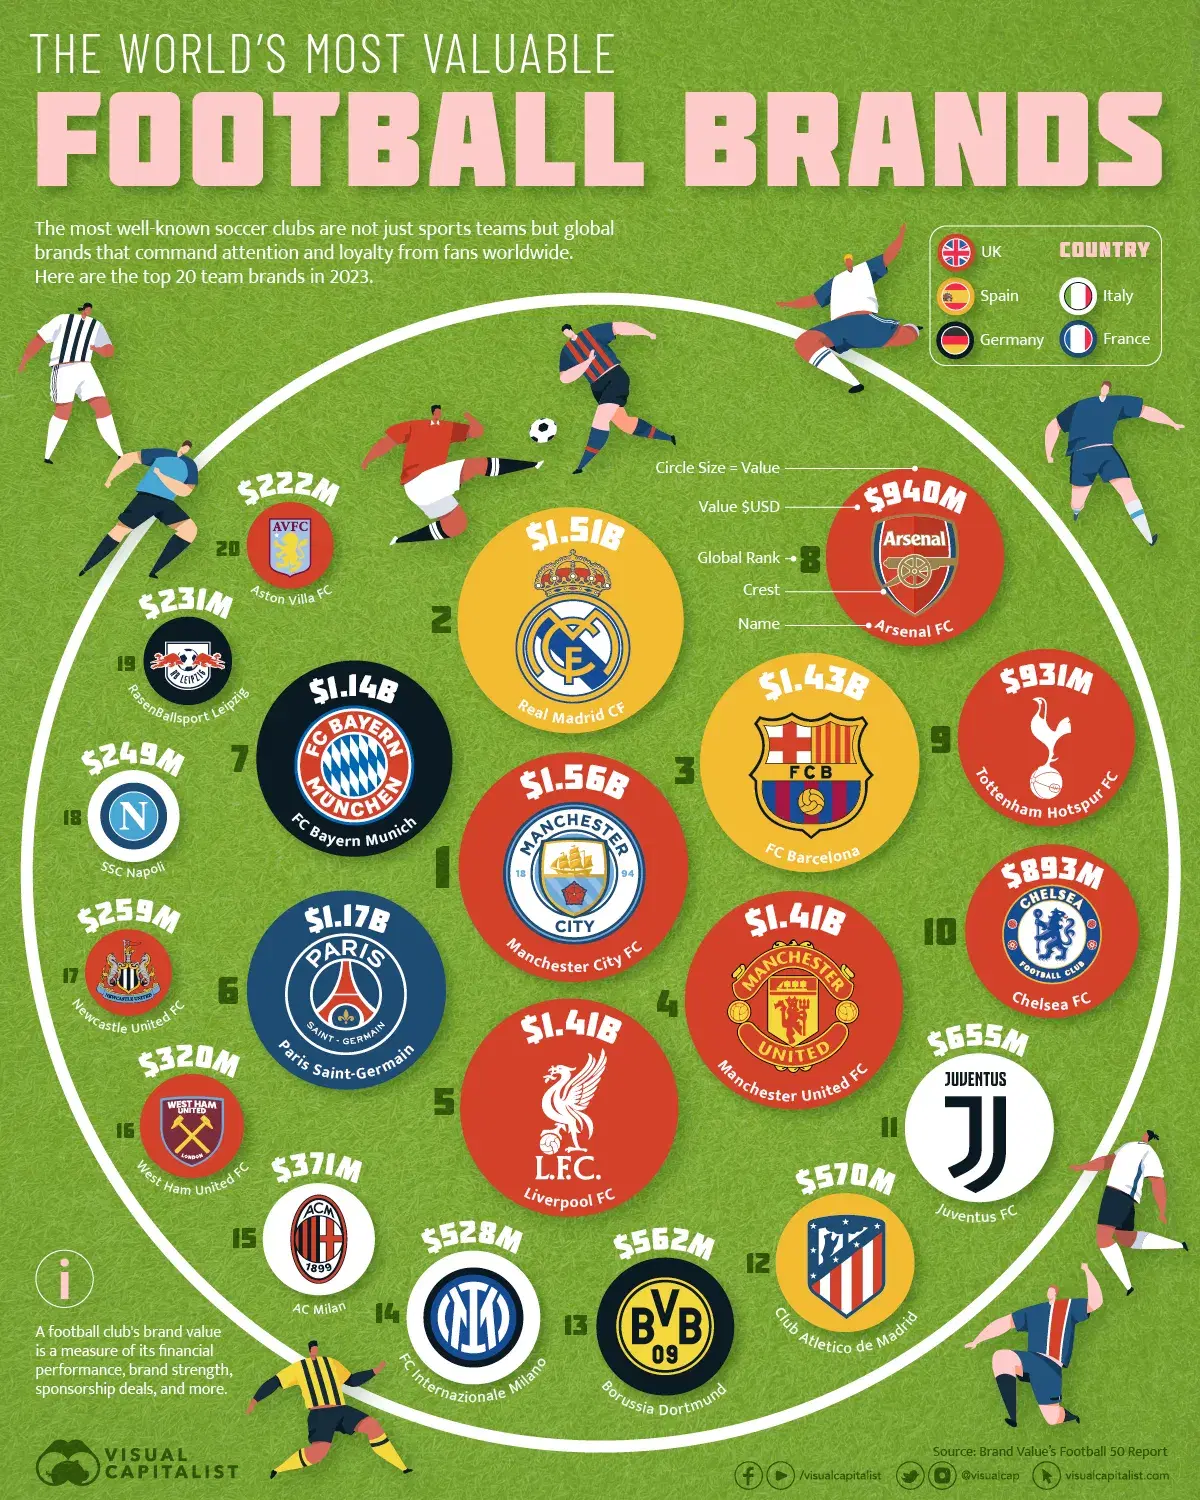 The World’s Most Valuable Football Club Brands